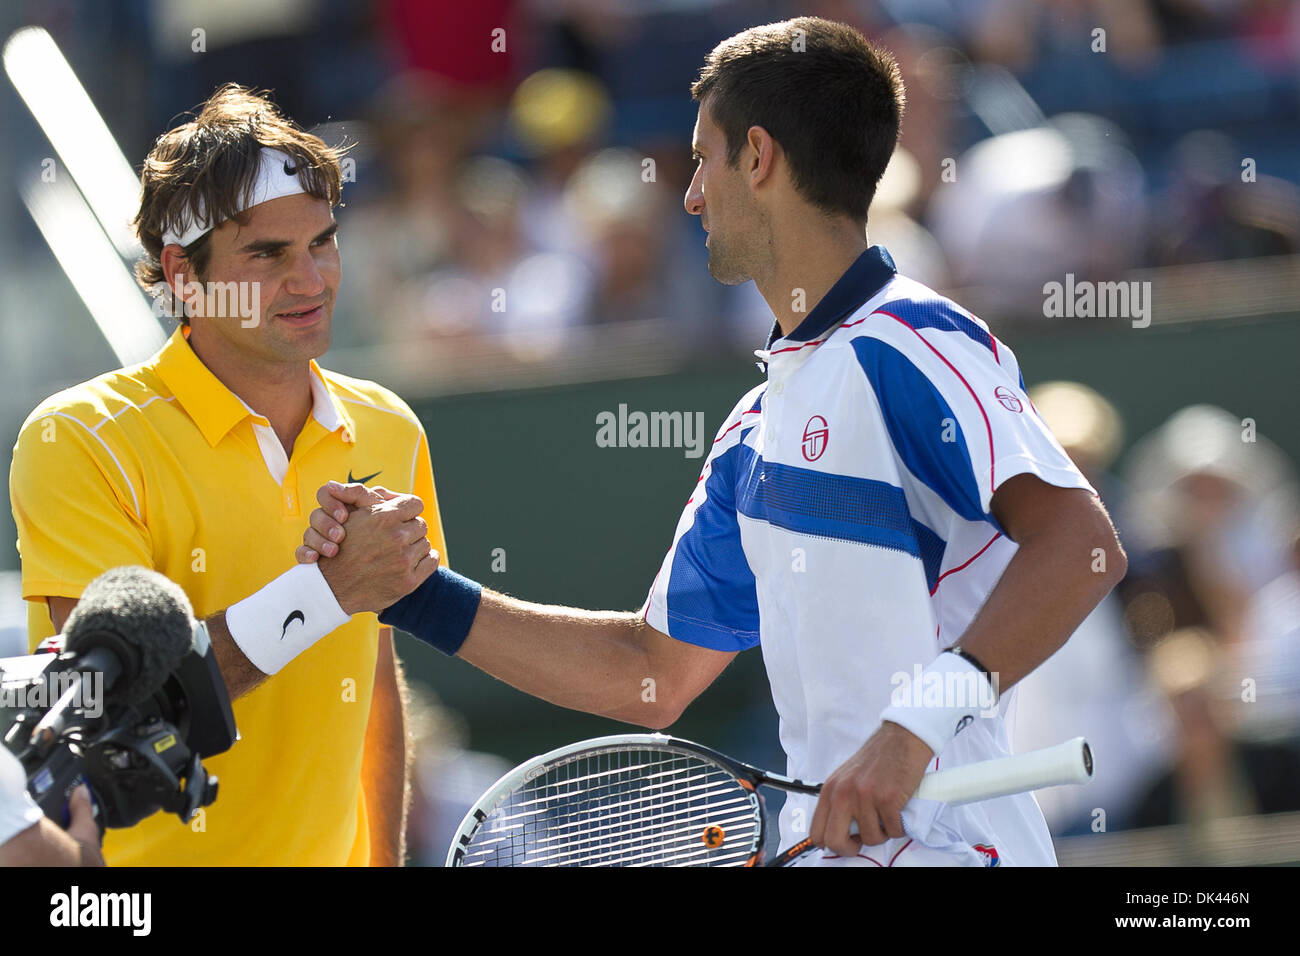 Mar. 19, 2011 - Indian Wells, California, U.S - No. 2 seed Roger Federer  (SUI) (left) congratulates No. 3 seed Novak Djokovic (SRB) (right) during  the men's semifinals match of the 2011